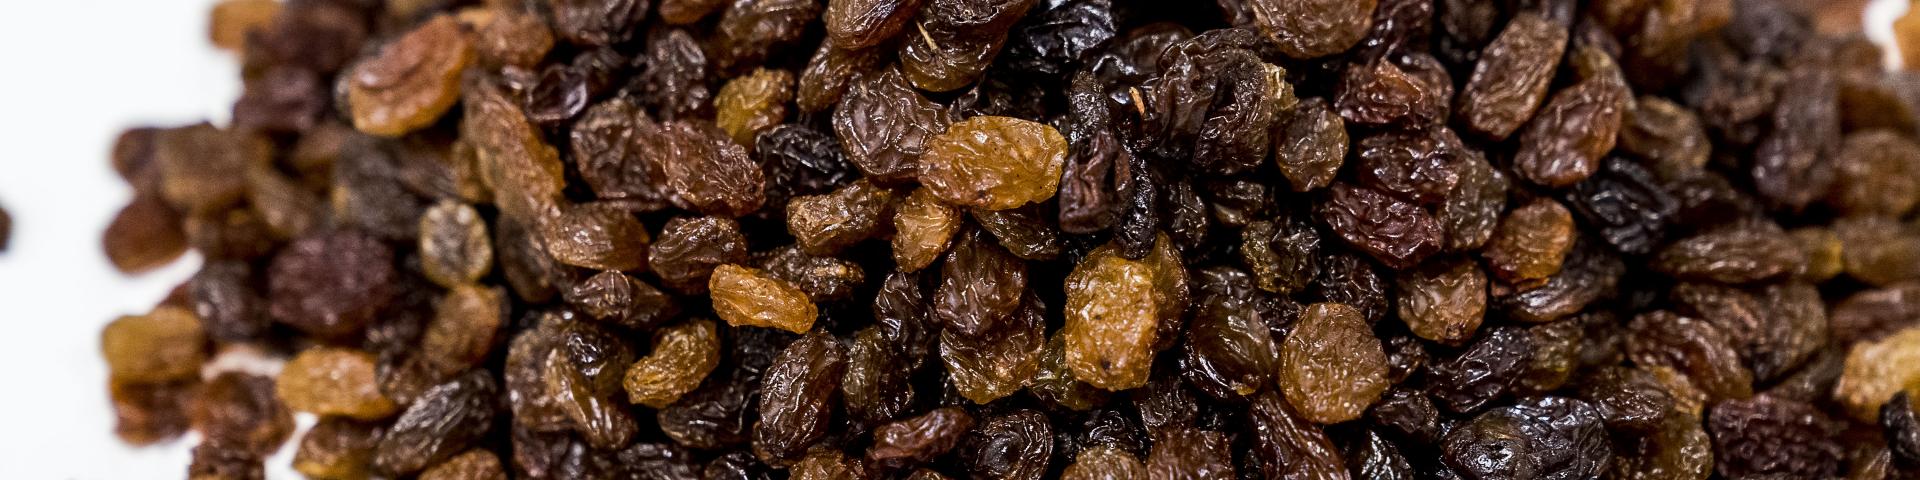 Dried grapes